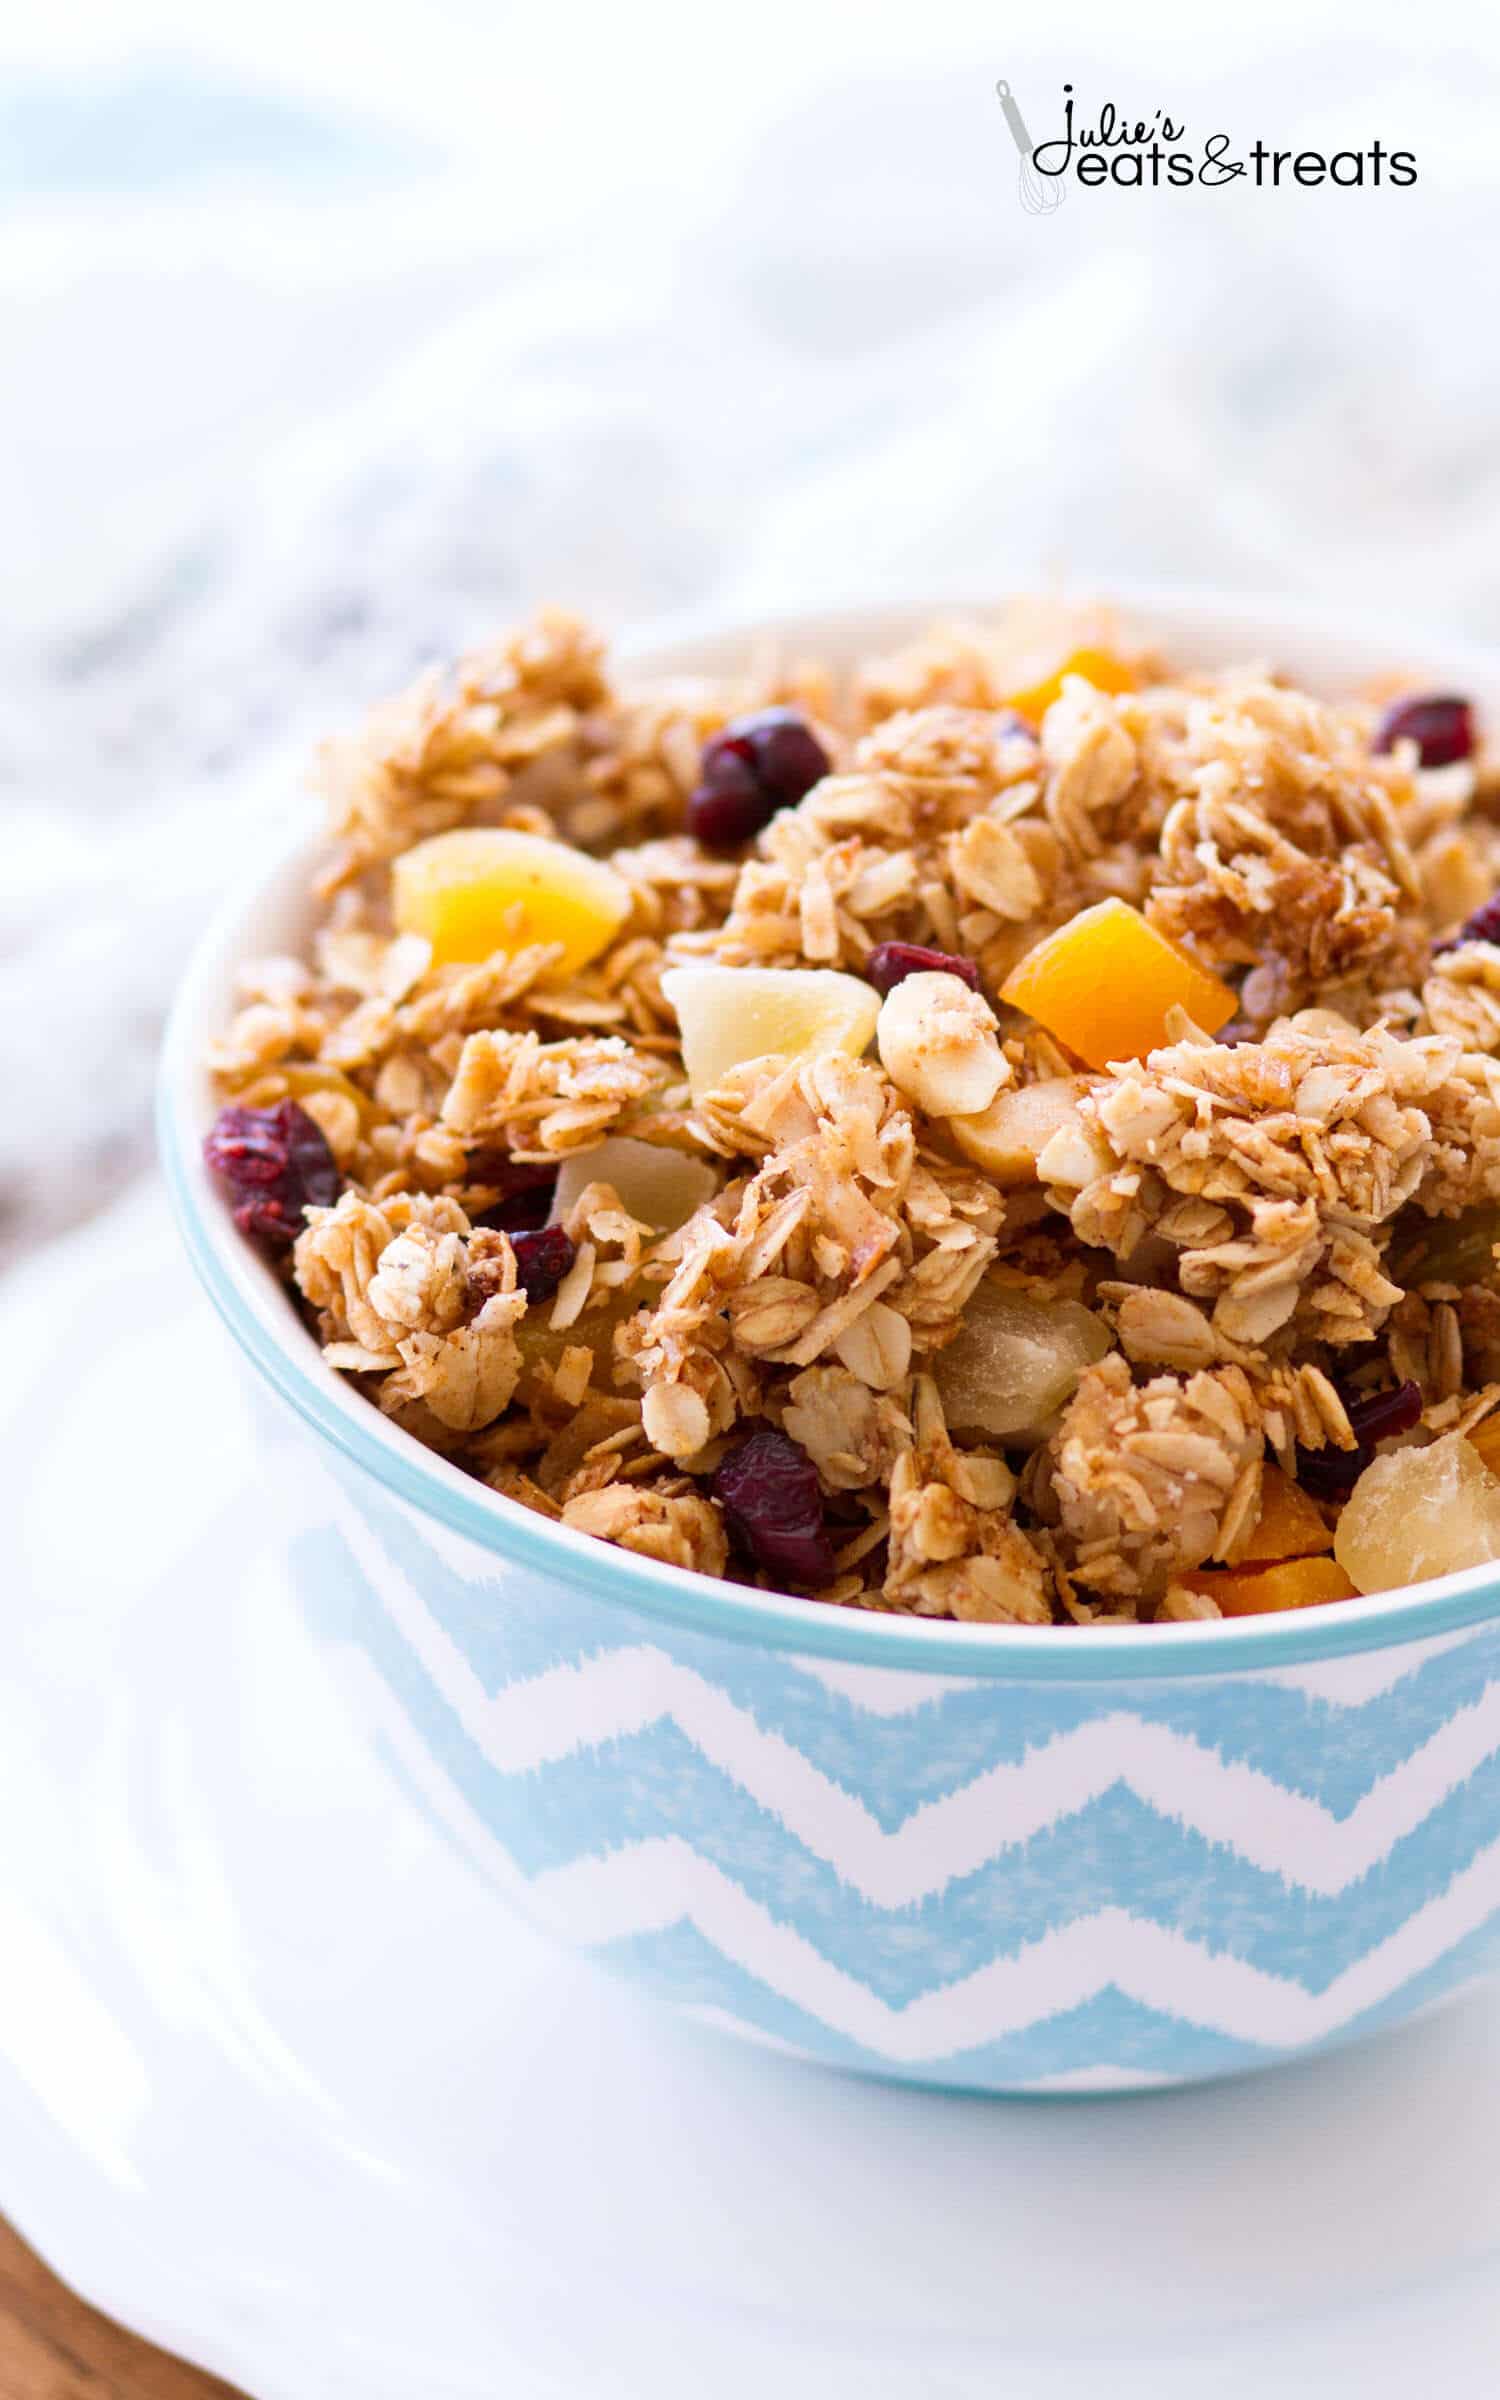 This homemade Tropical Coconut Granola is filled with shredded coconut, coconut oil, and coconut sugar! Dried pineapple, apricots, golden raisins, cranberries, and macadamia nuts give this easy coconut granola a tropical flavor. This homemade granola recipe is so easy, you may never buy store-bought again!